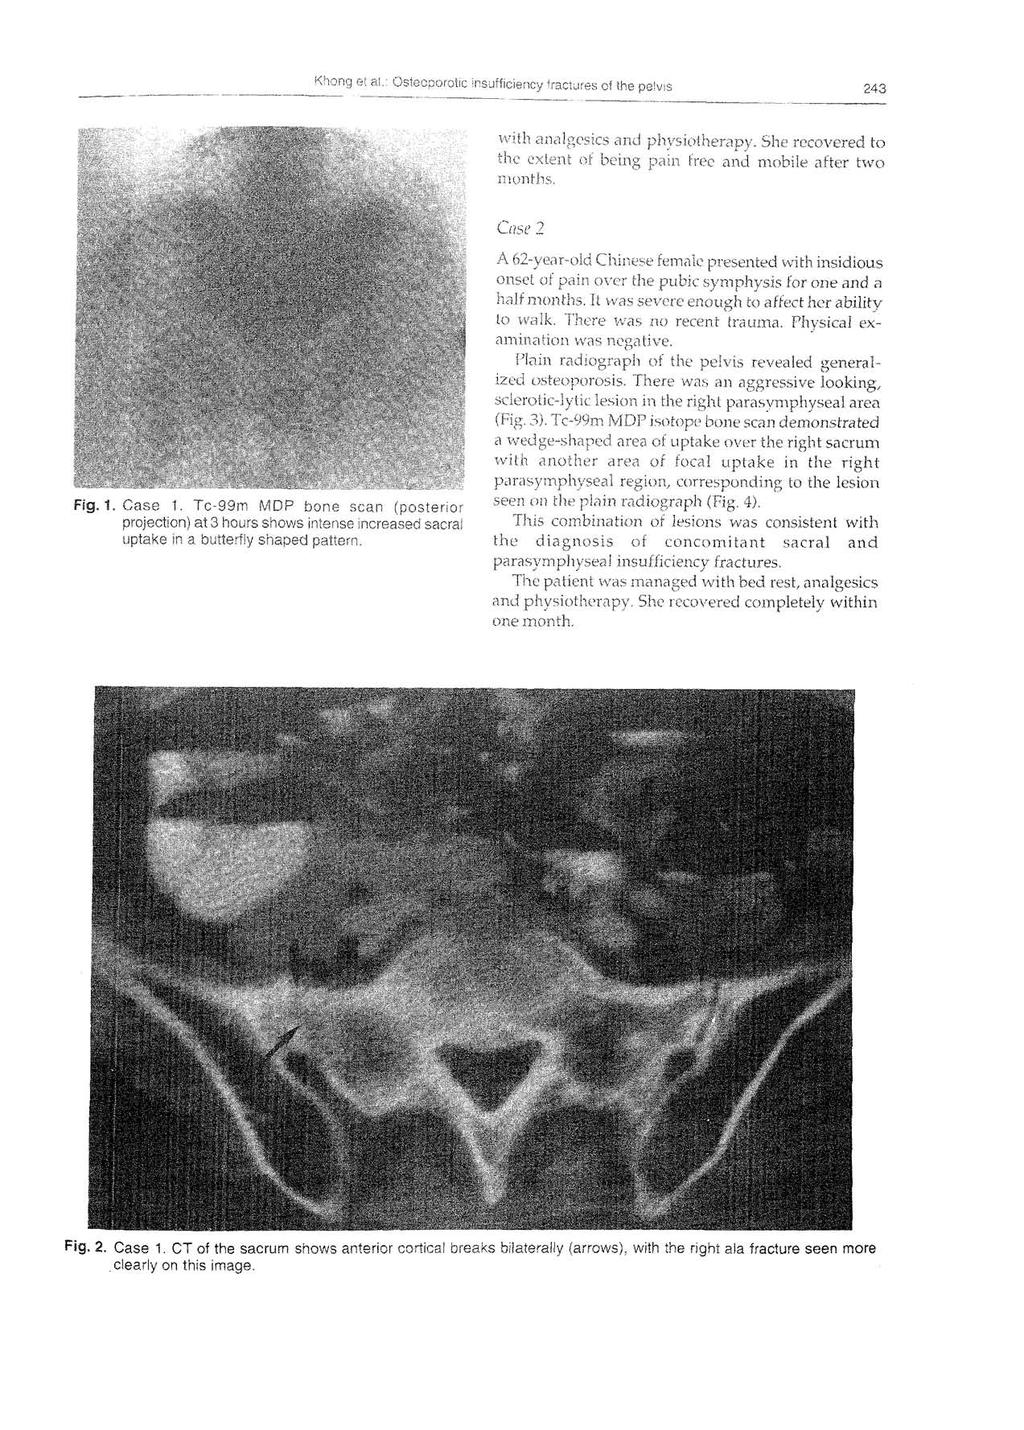 243 Fig. 1. Case 1. Tc-99m MDP bone scan (posterior projection) at 3 hours shows intense increased sacral uptake in a butterfly shaped pattern.